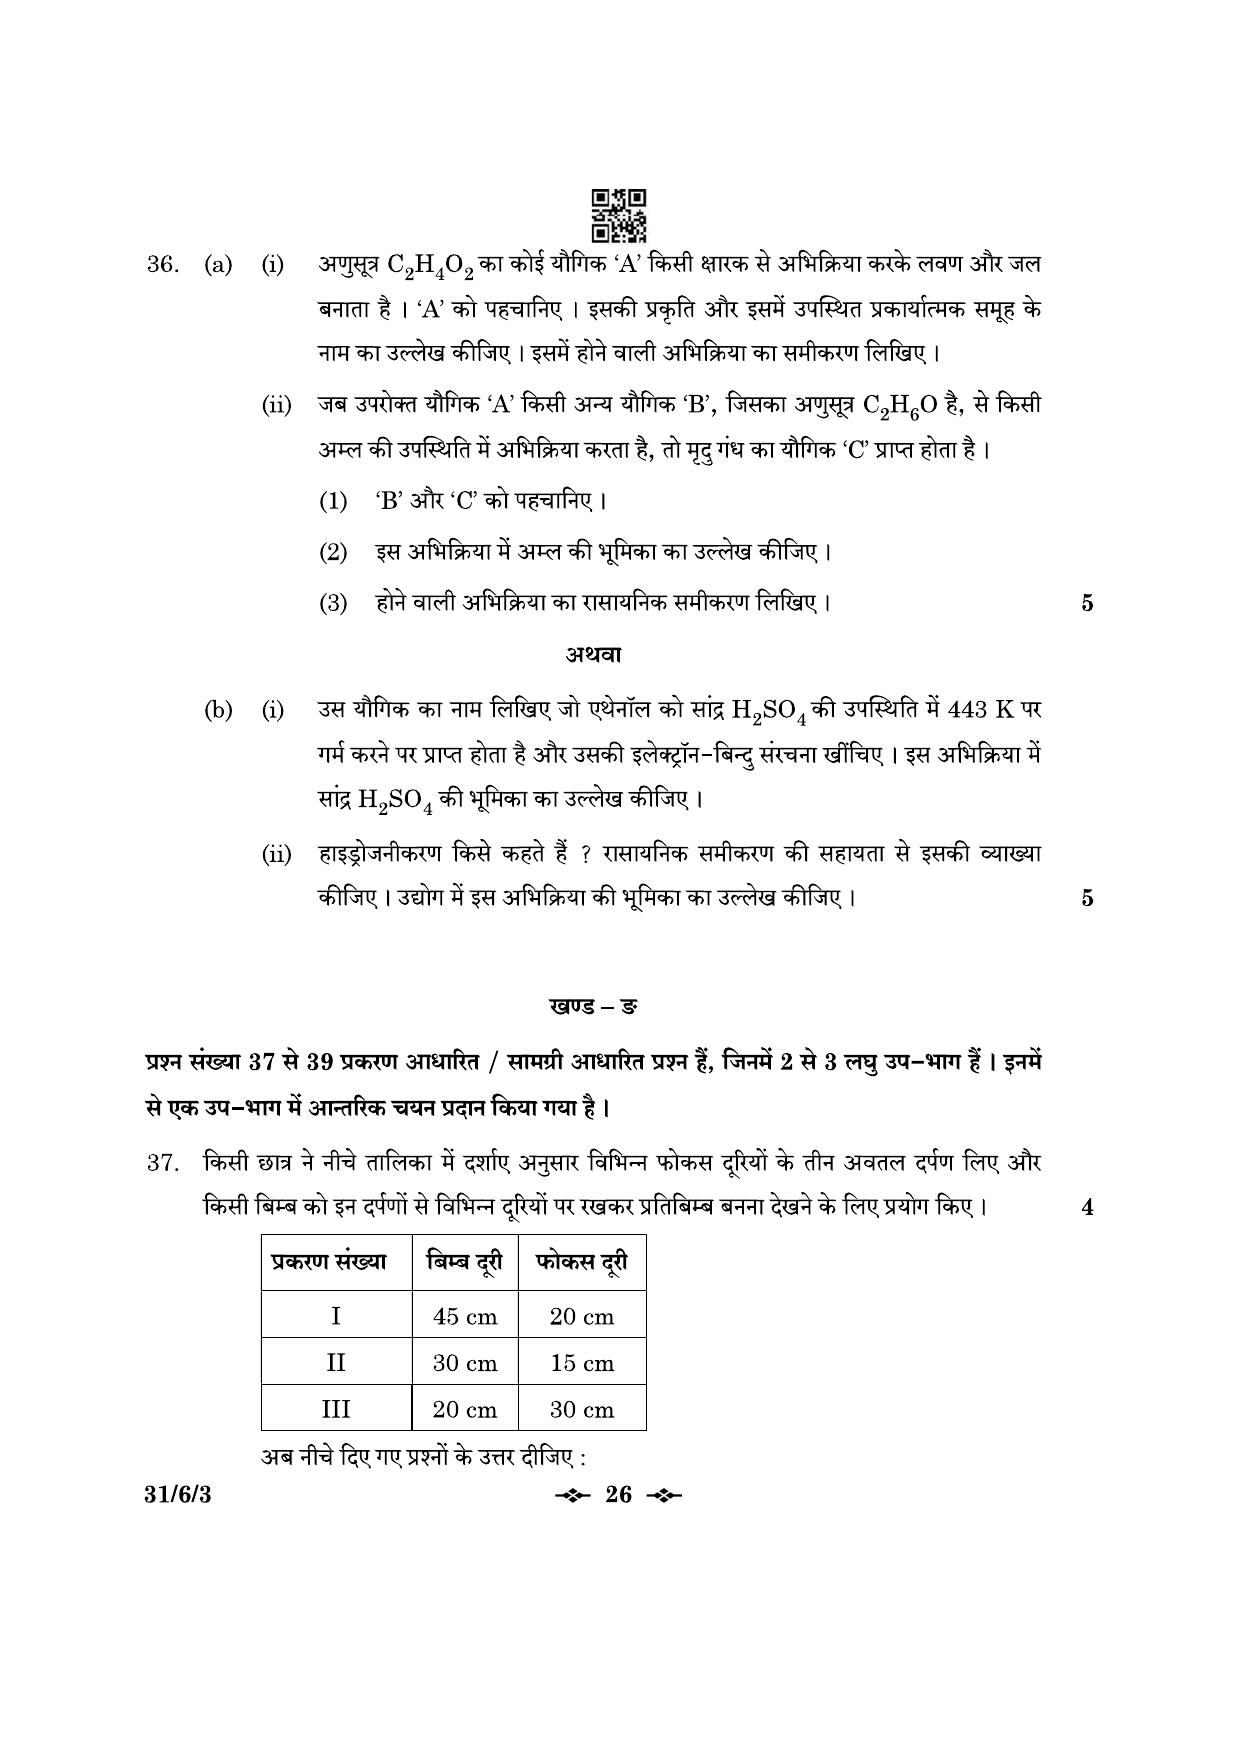 CBSE Class 10 31-6-3 Science 2023 Question Paper - Page 26